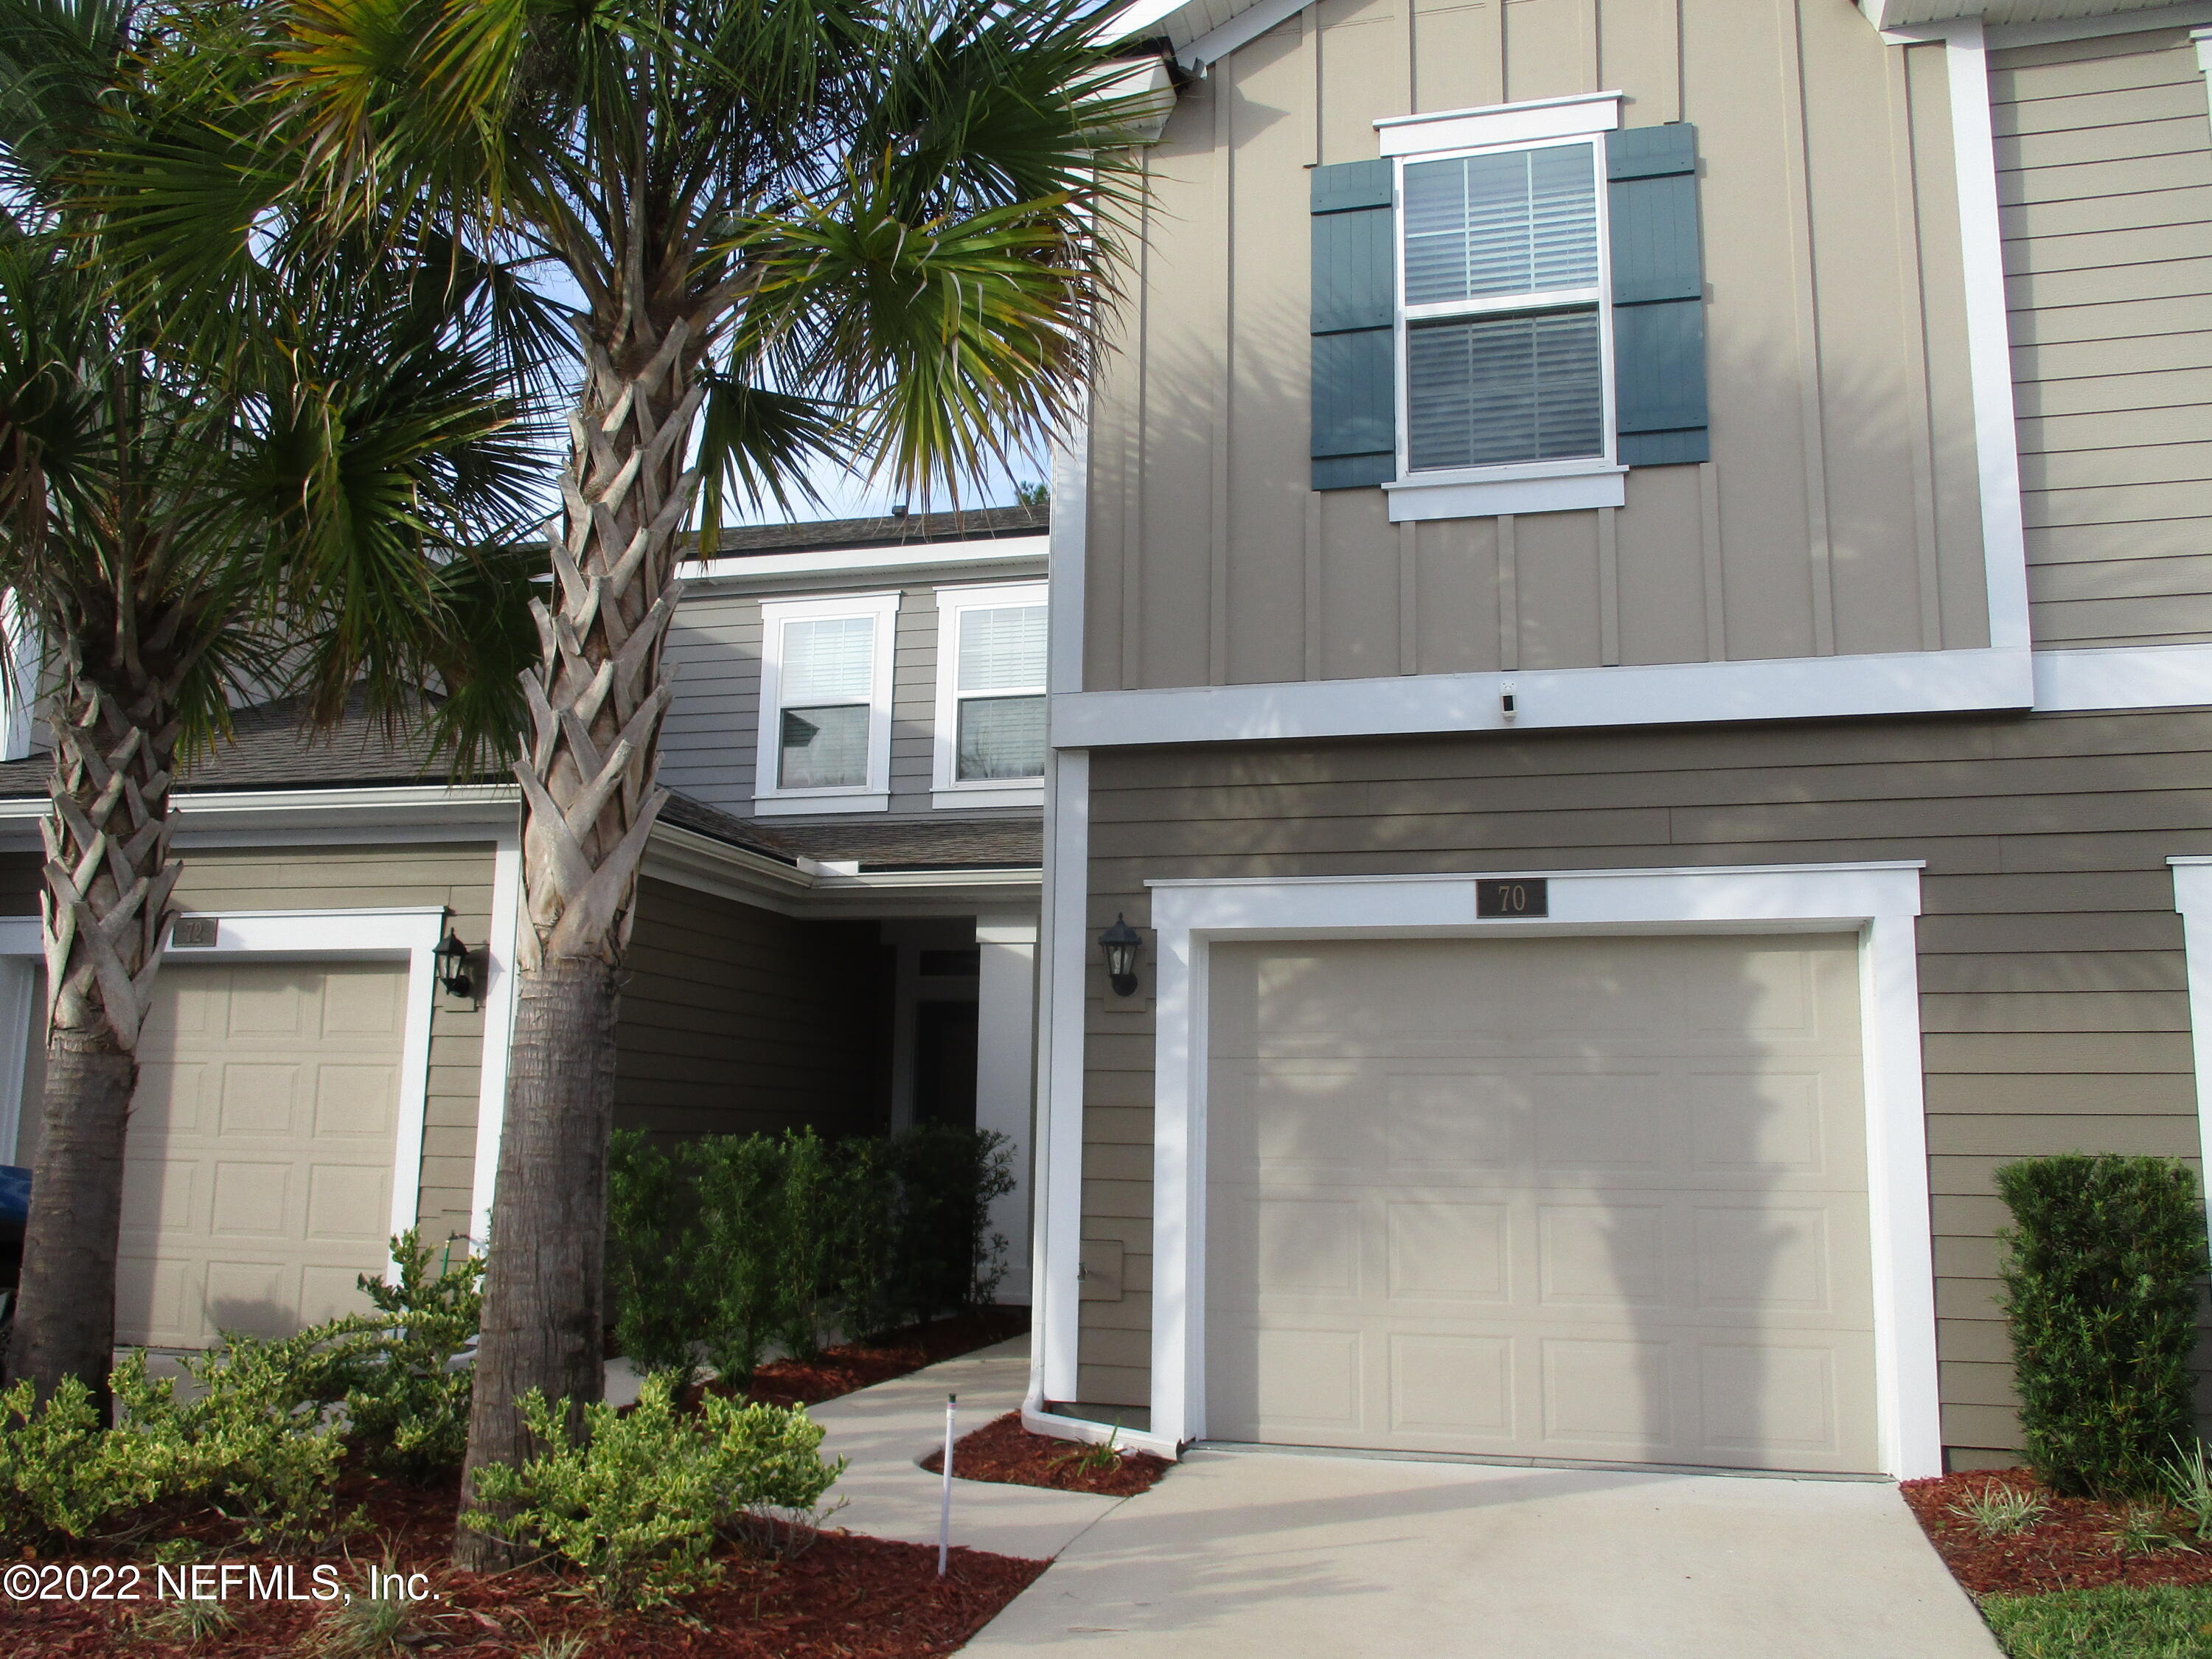 View Fruit Cove, FL 32259 townhome